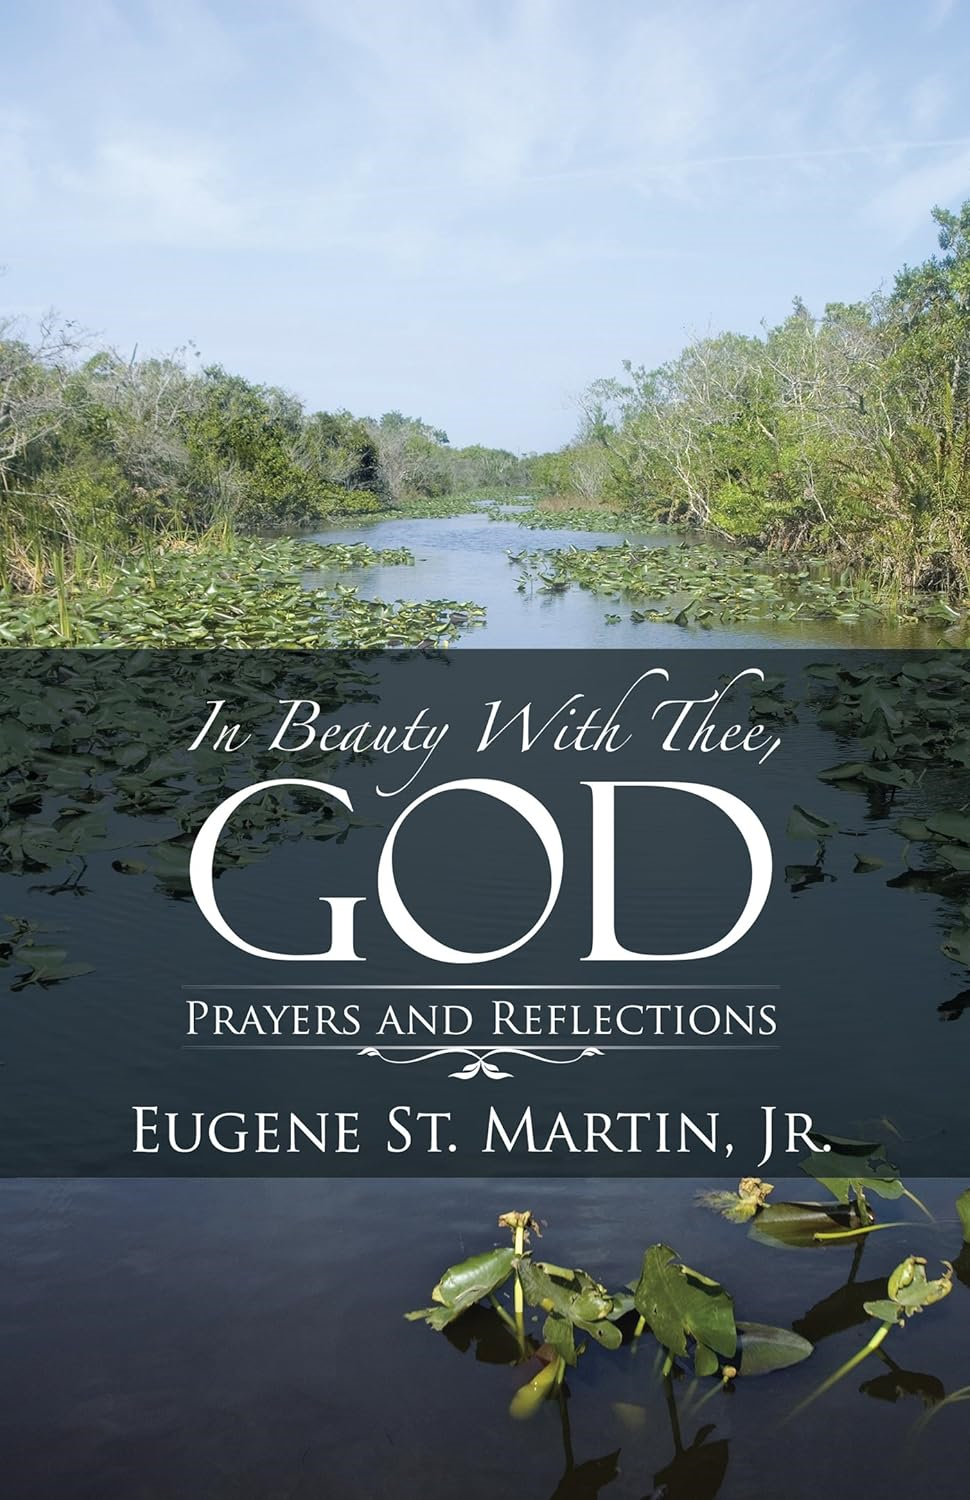 New Book "In Beauty with Thee, God: Prayers and Reflections" Merges Faith with Tennis Through the Eyes of Eugene St. Martin, Jr.